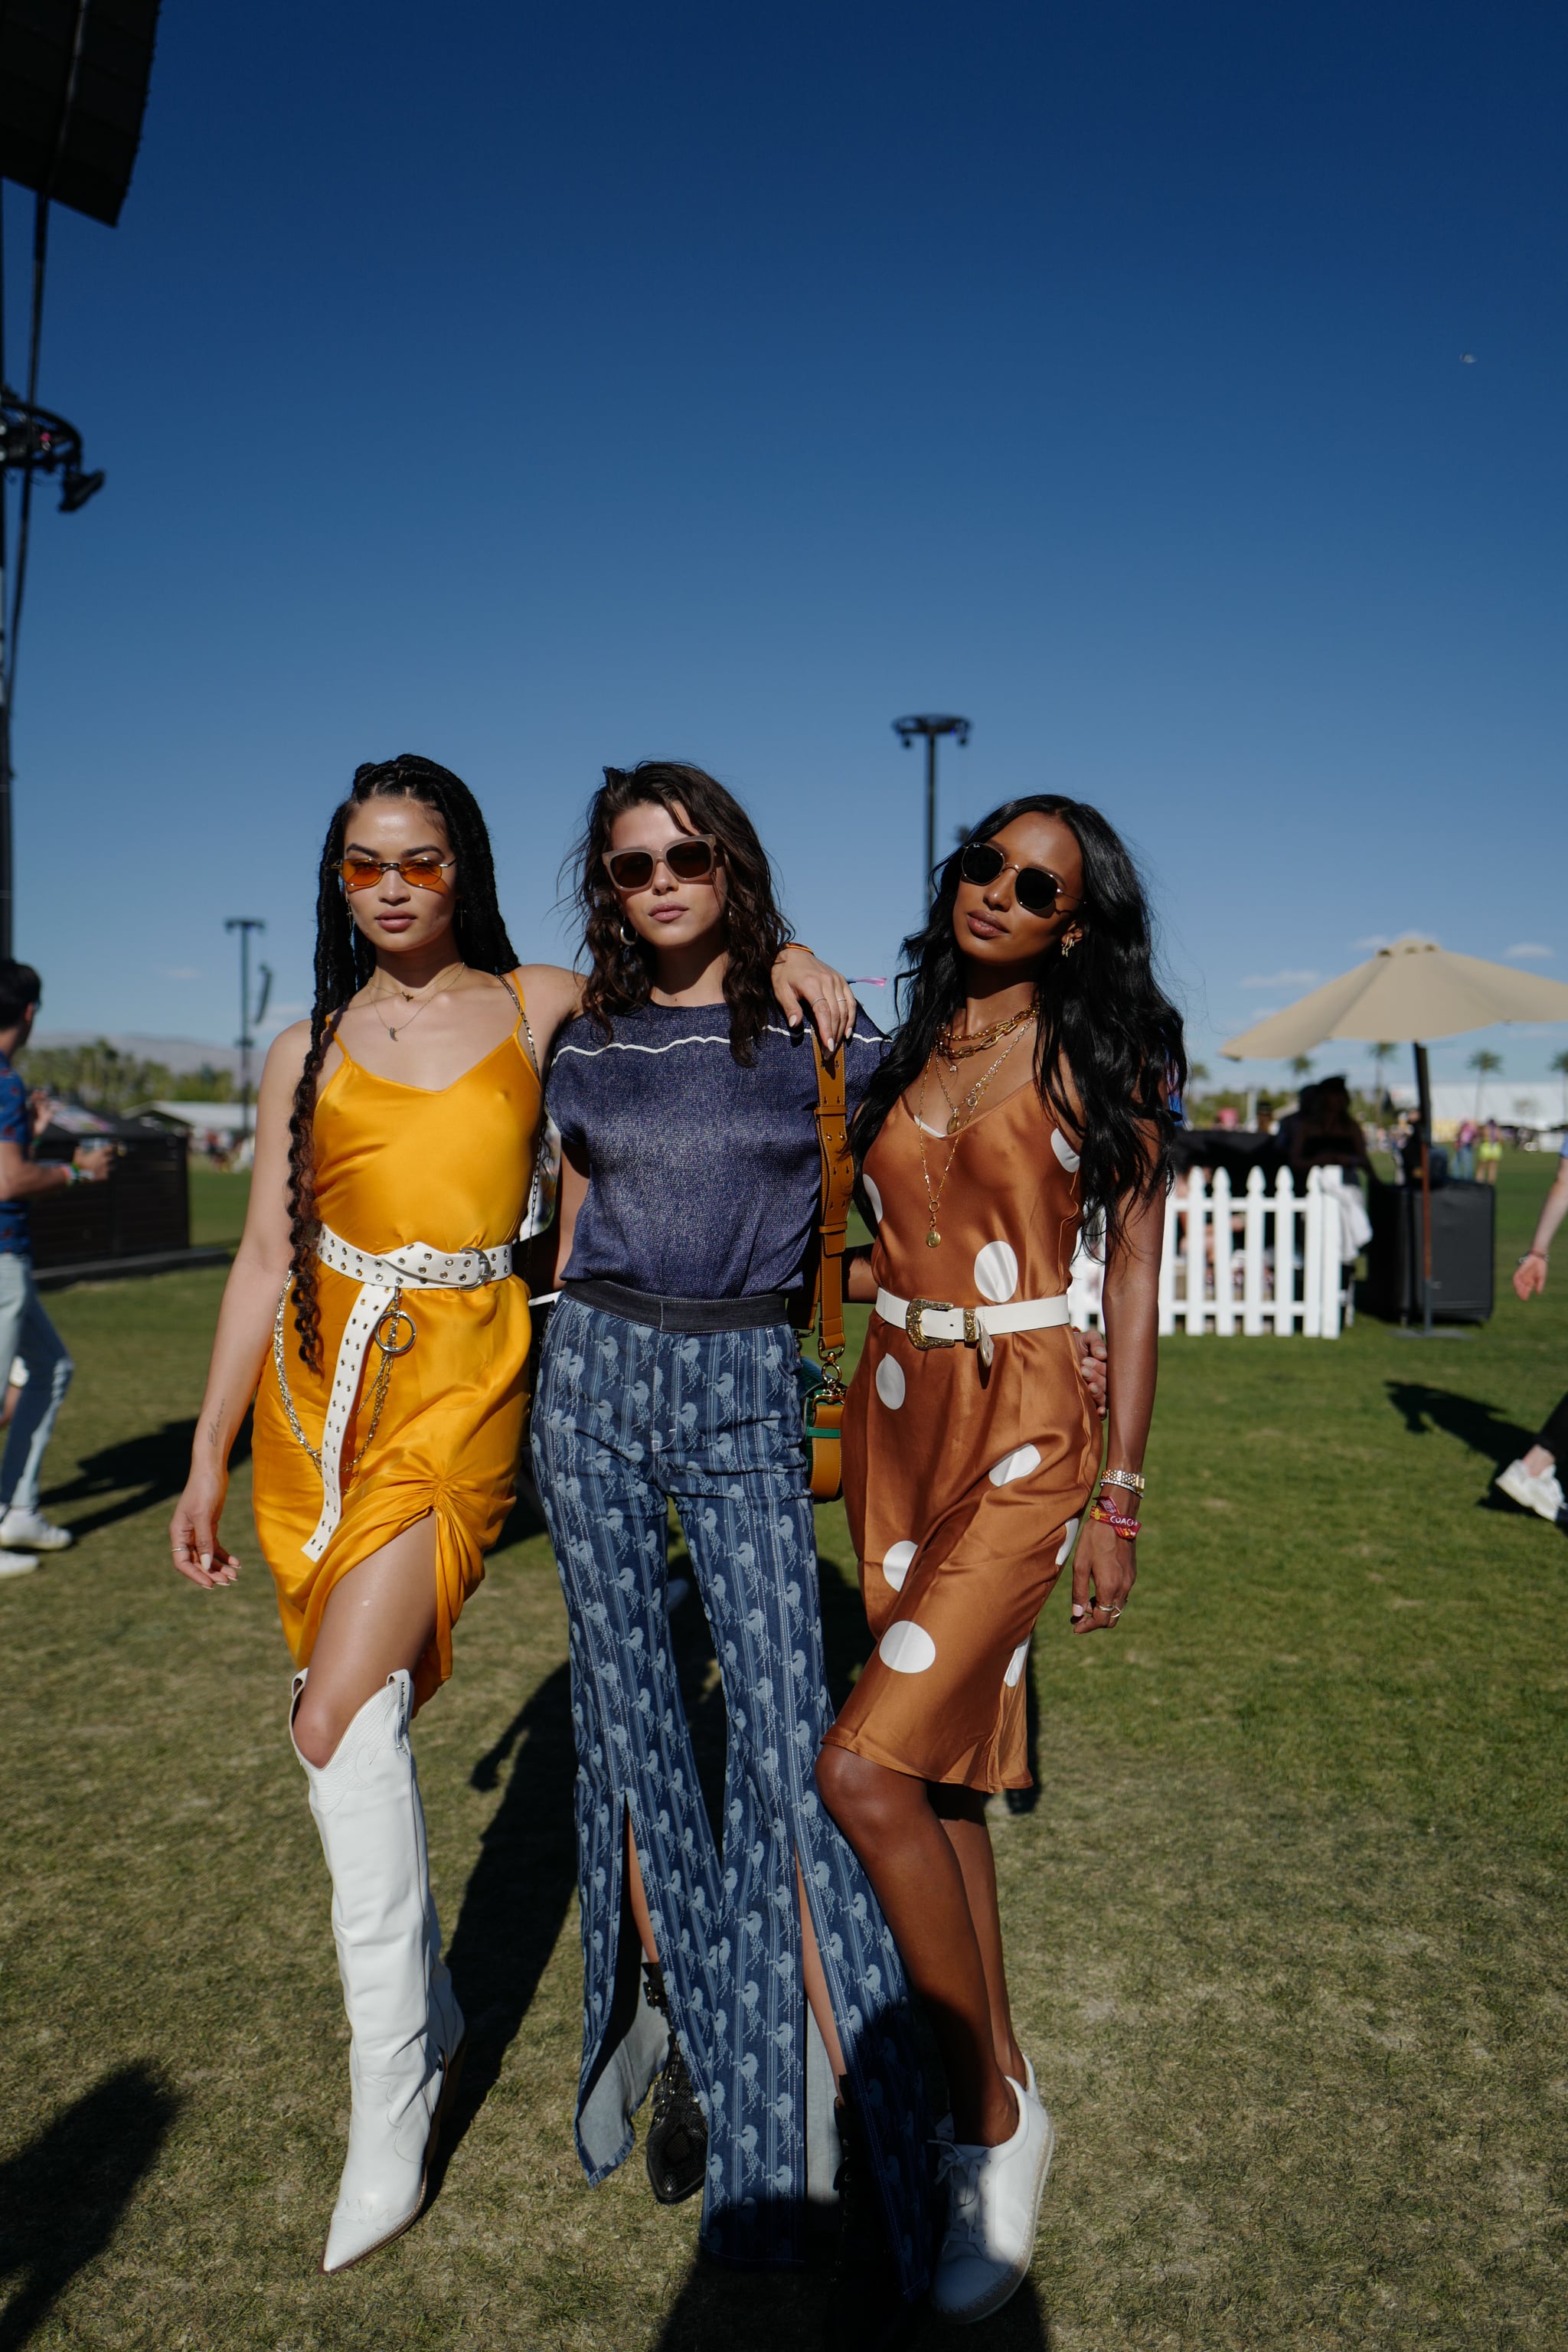 Coachella dress review🖤, Gallery posted by Tash Soodeen